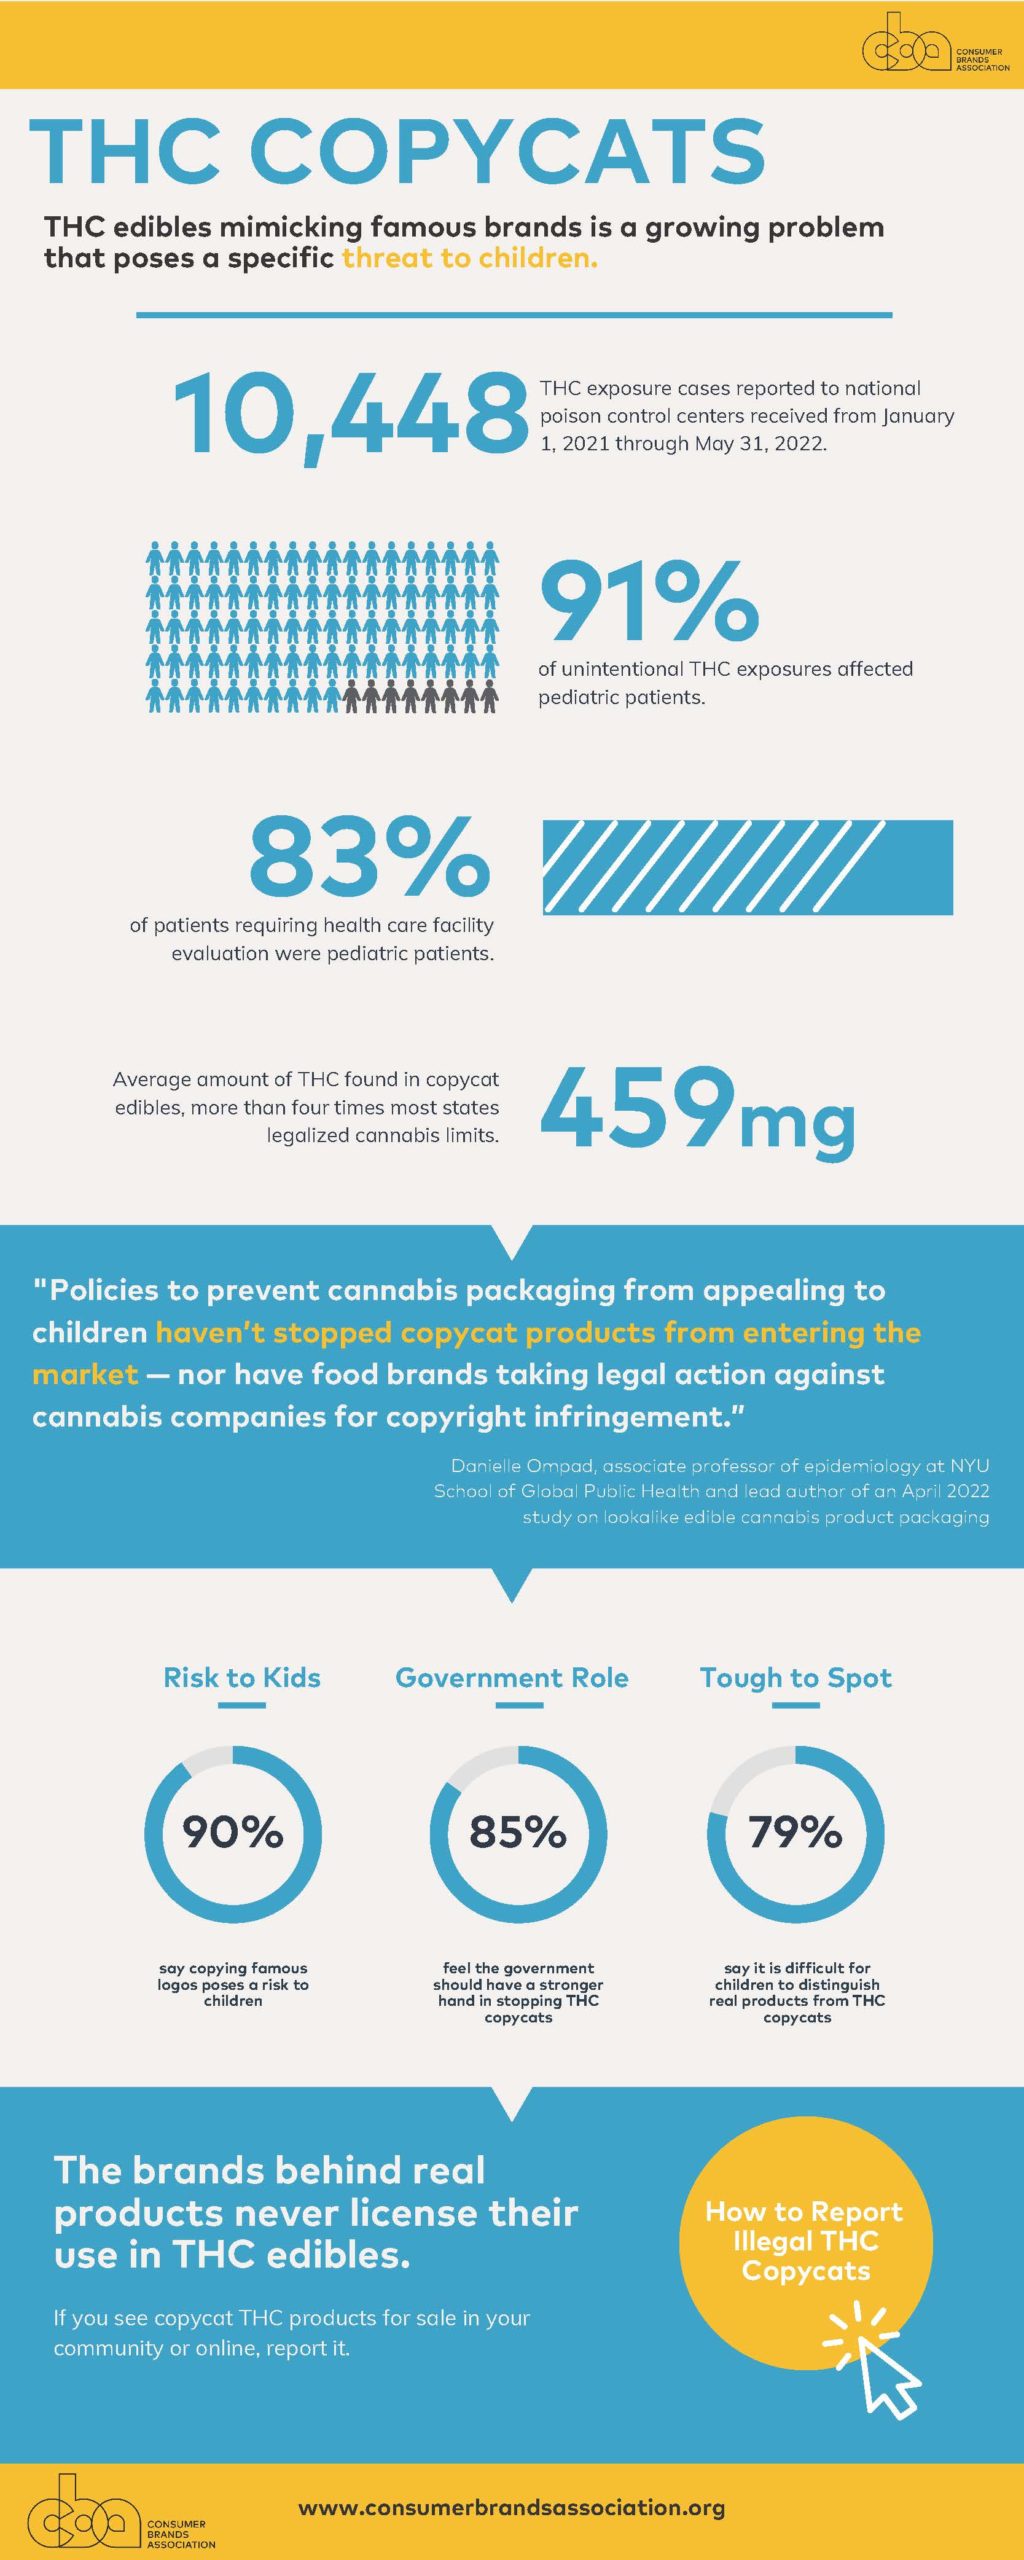 A yellow and blue infographic describing the impact unintentional THC exposure has on children.